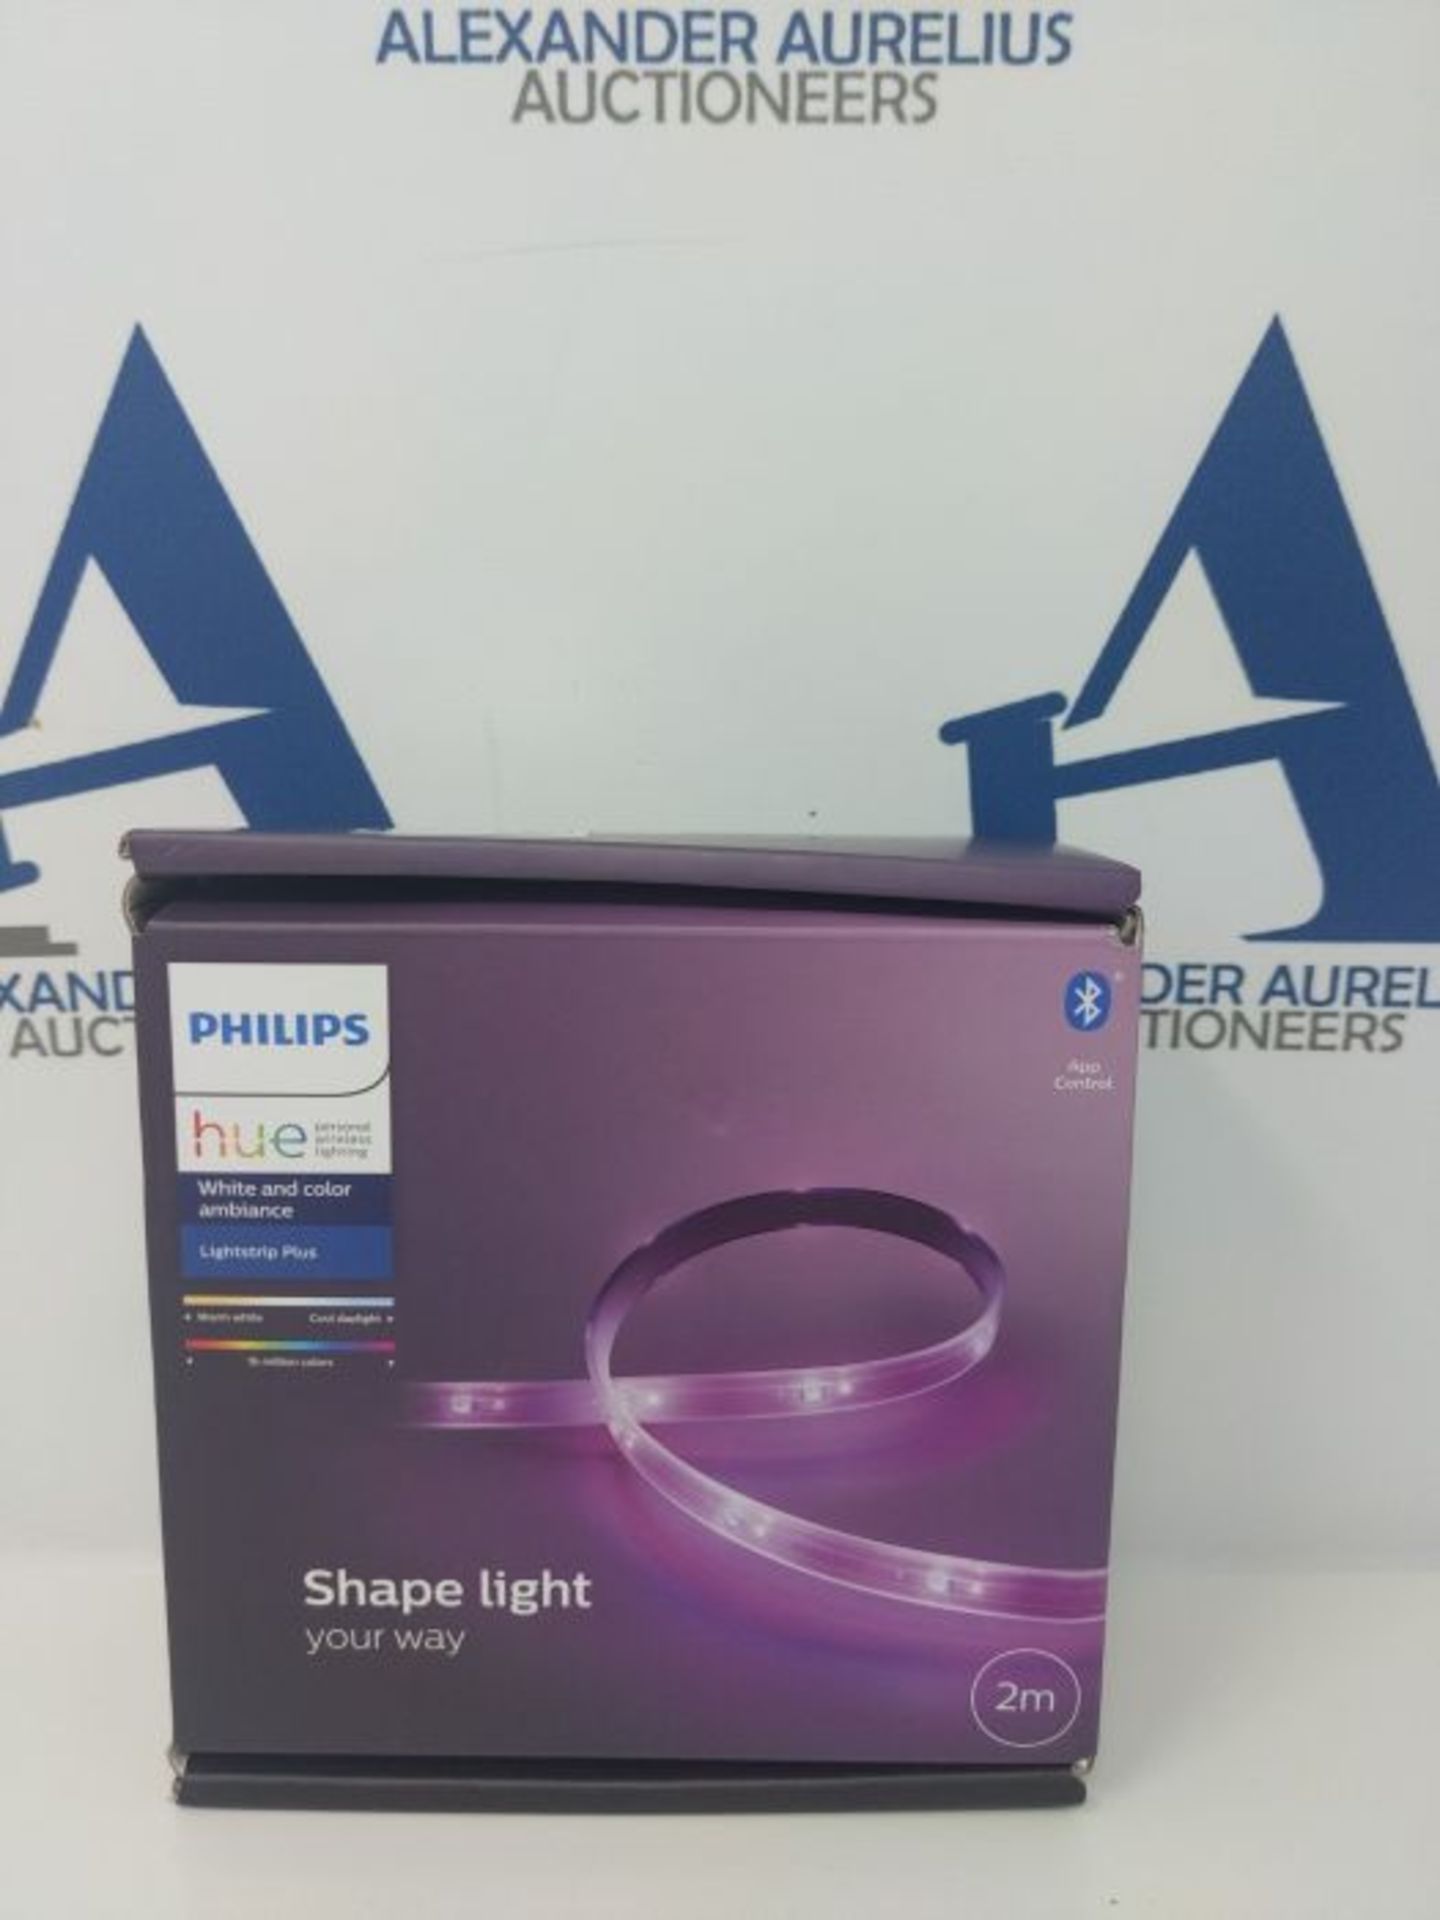 RRP £66.00 Philips Hue Lightstrip Plus v4 [2 m] White and Colour Ambiance Smart LED Kit with Blue - Image 2 of 3